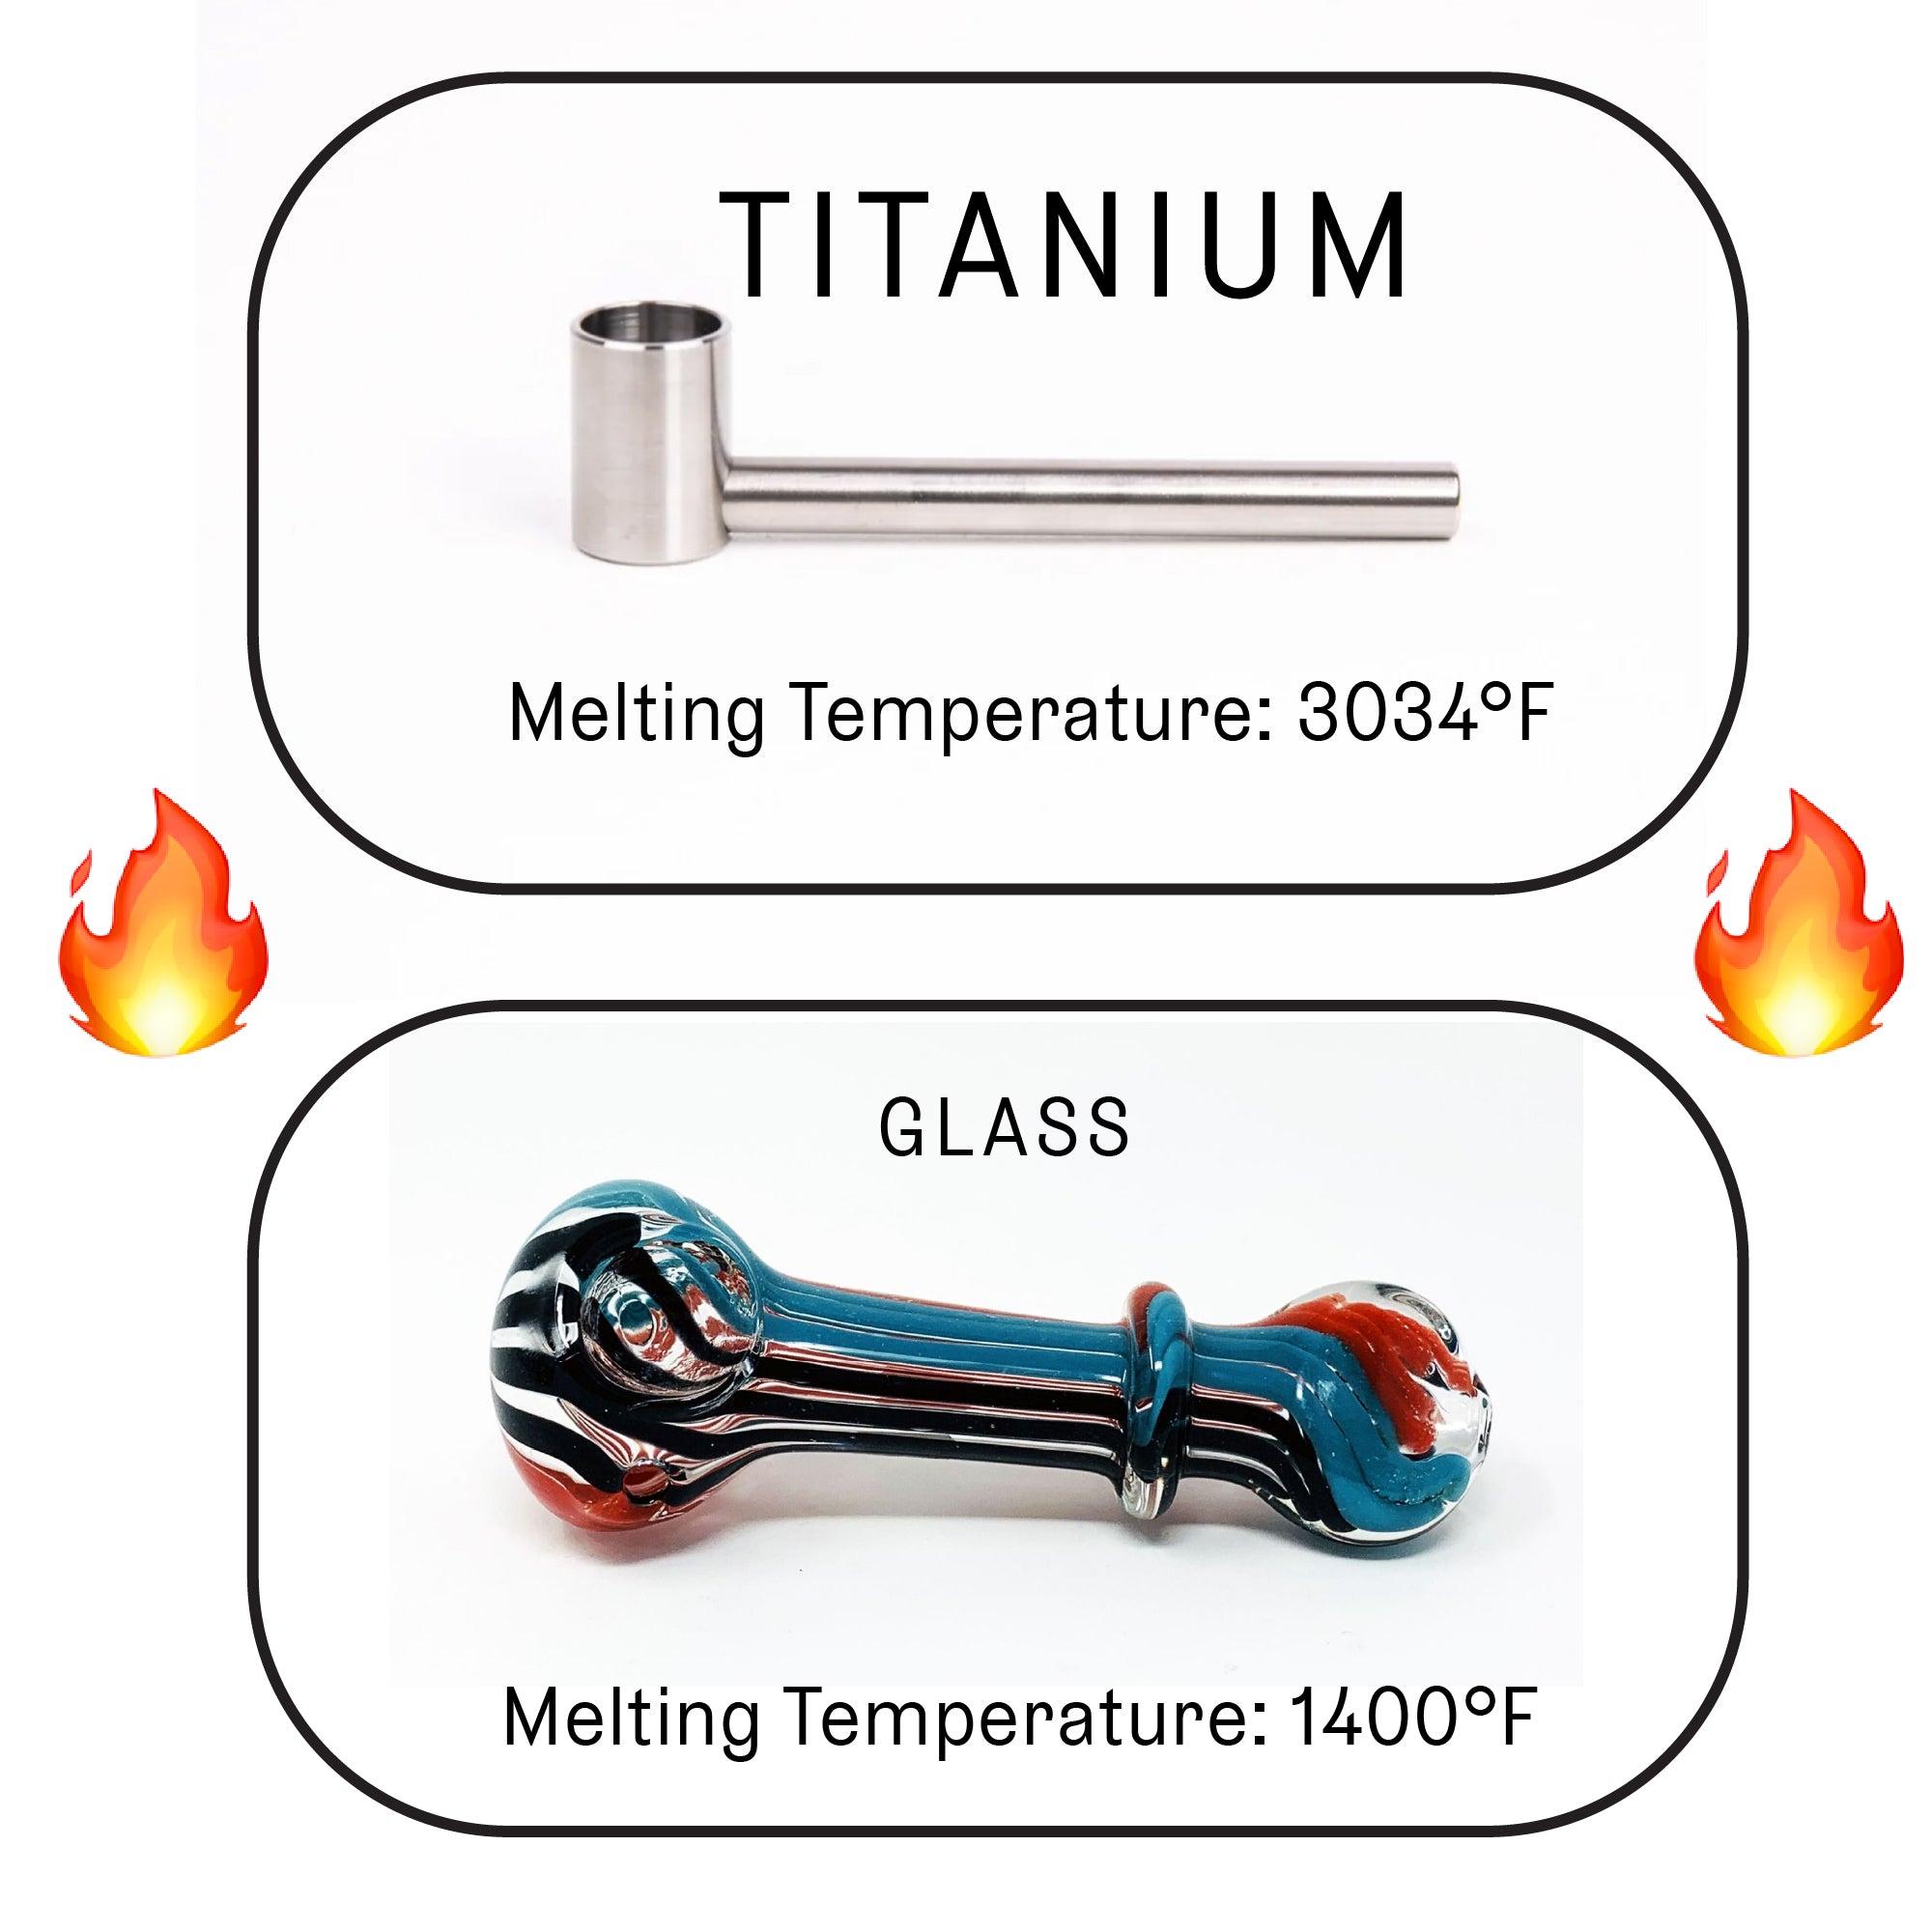 Titanium is better than glass for smoking